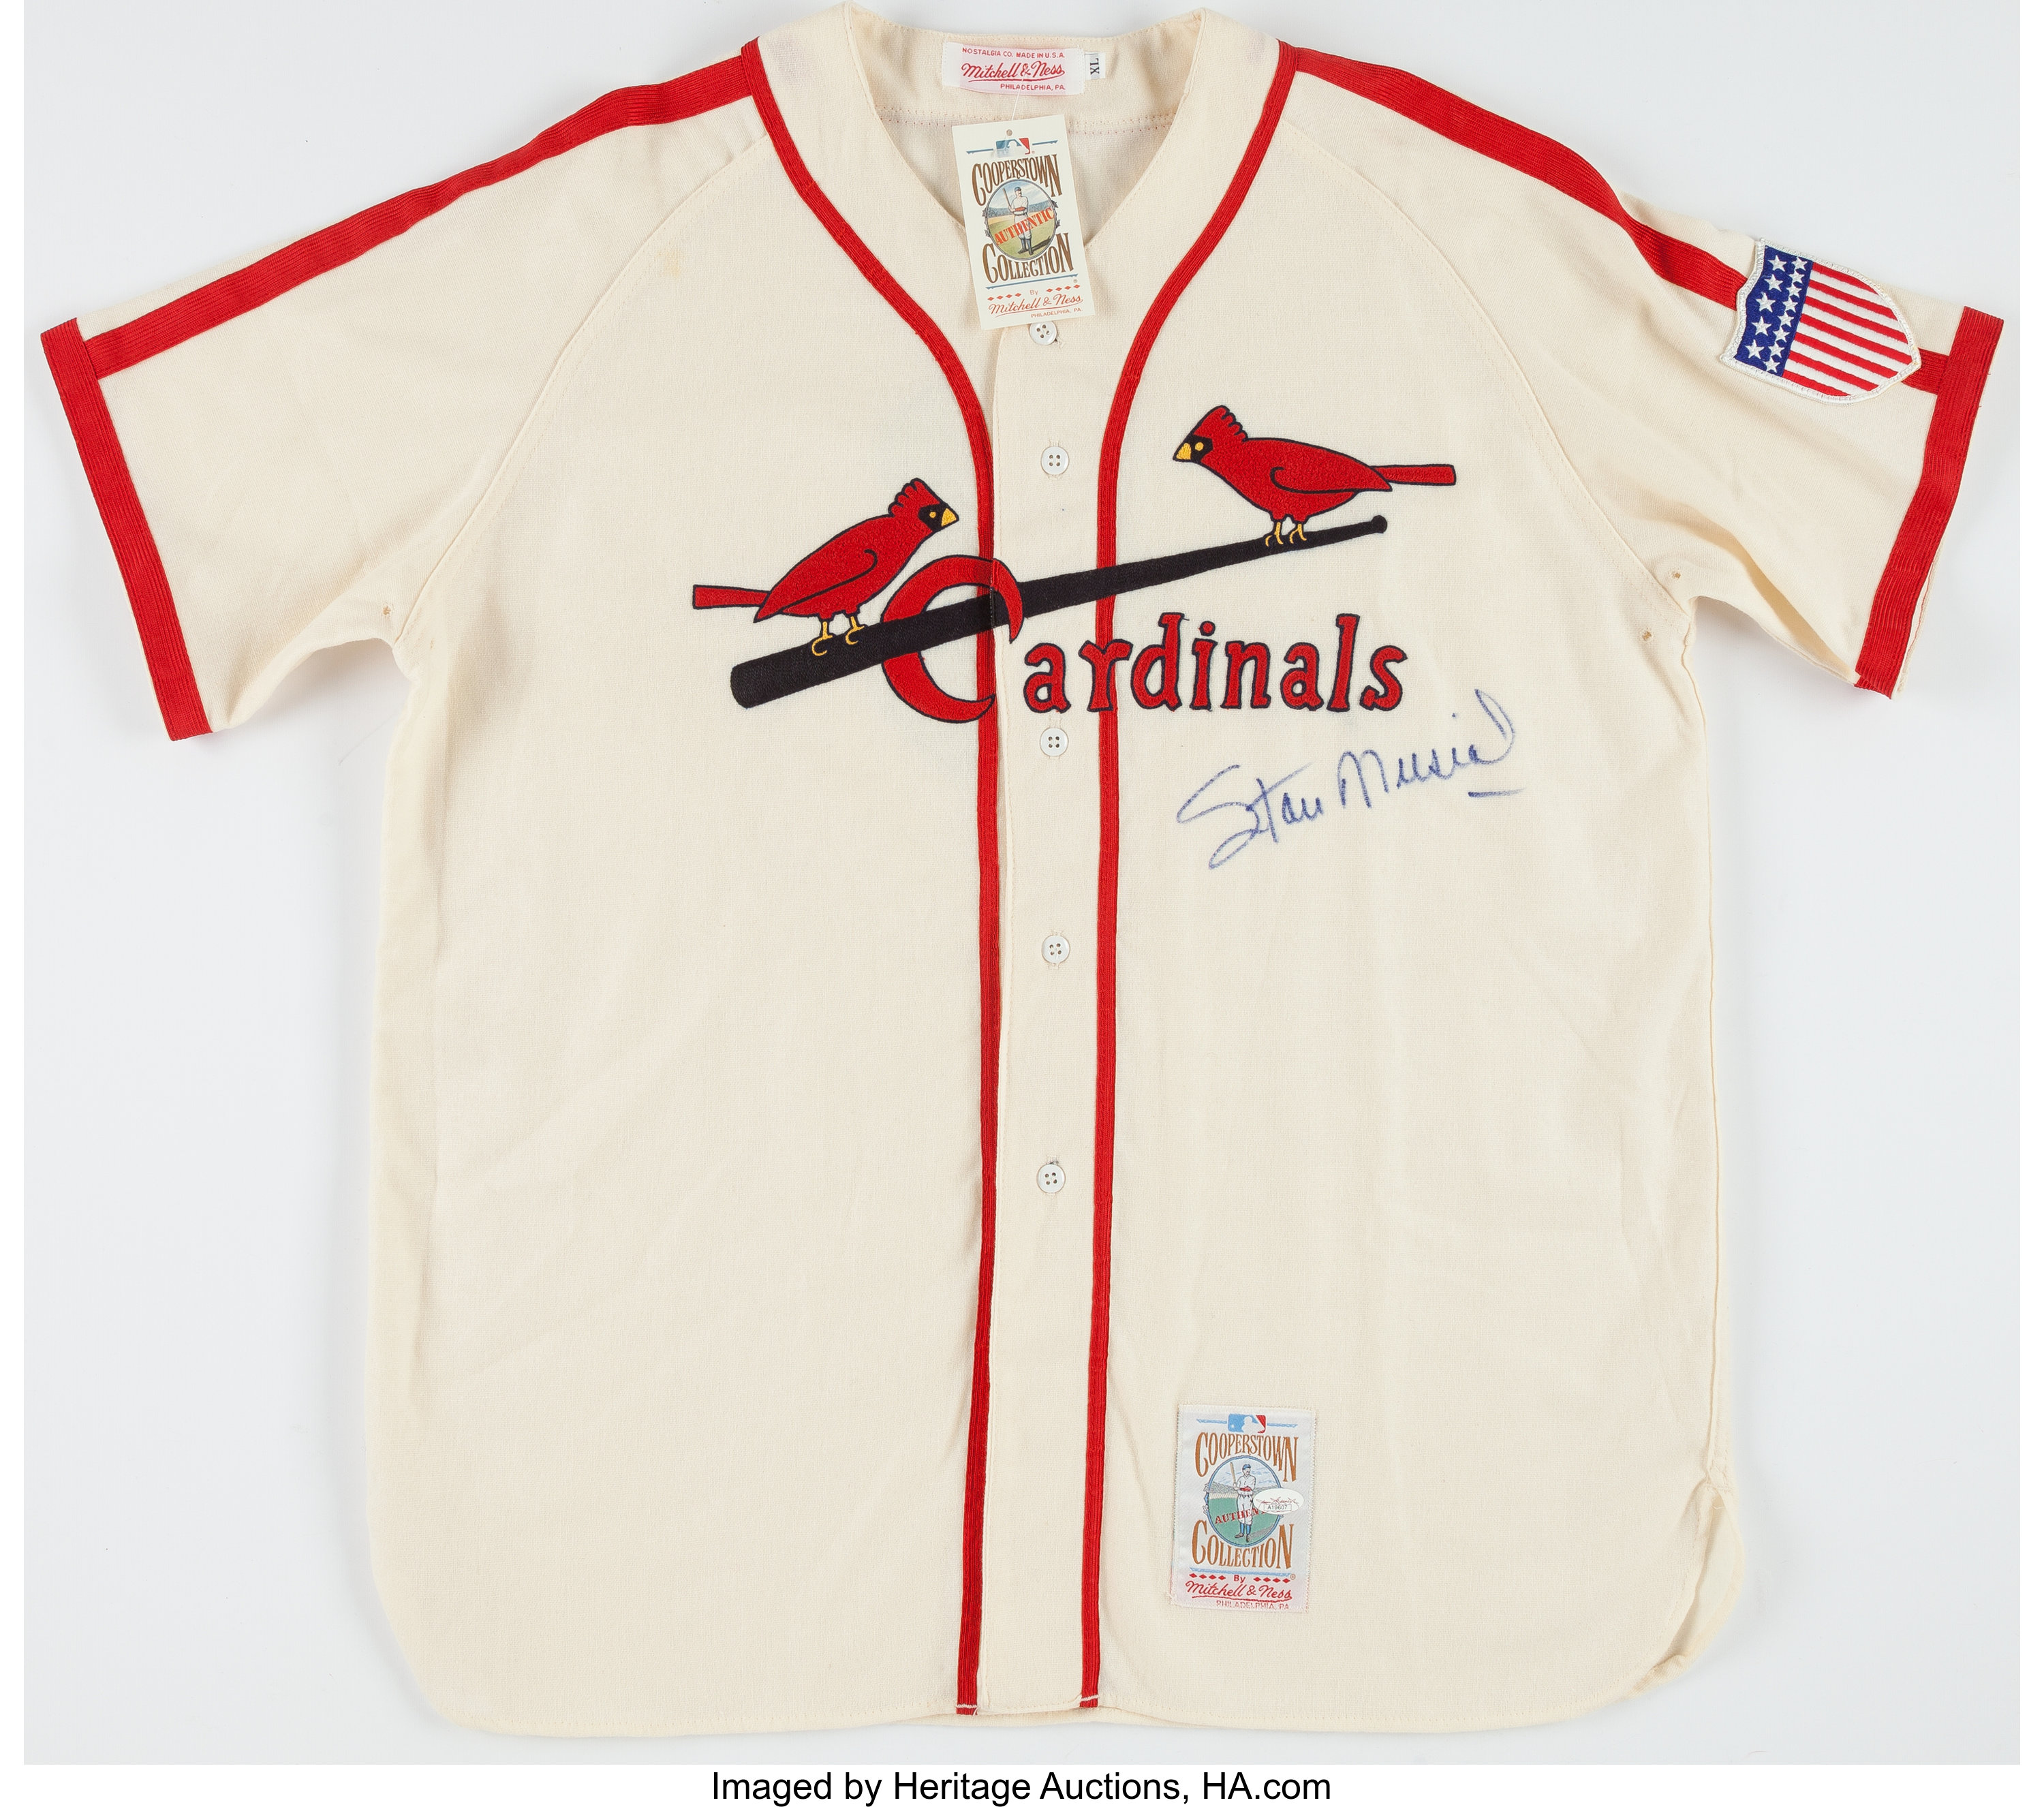 stan musial jersey products for sale